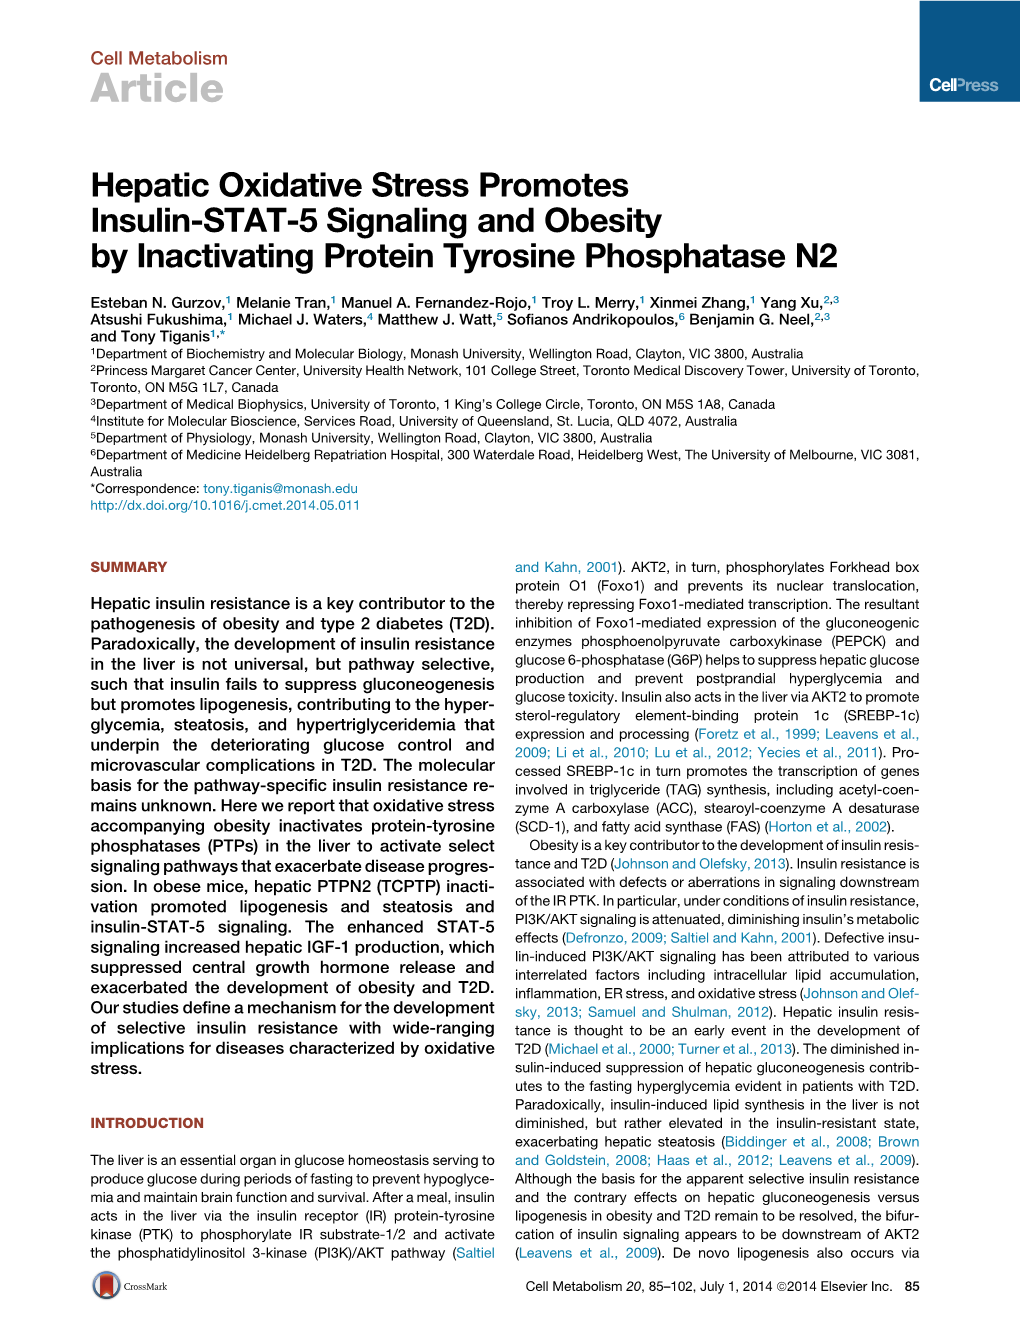 Hepatic Oxidative Stress Promotes Insulin-STAT-5 Signaling and Obesity by Inactivating Protein Tyrosine Phosphatase N2